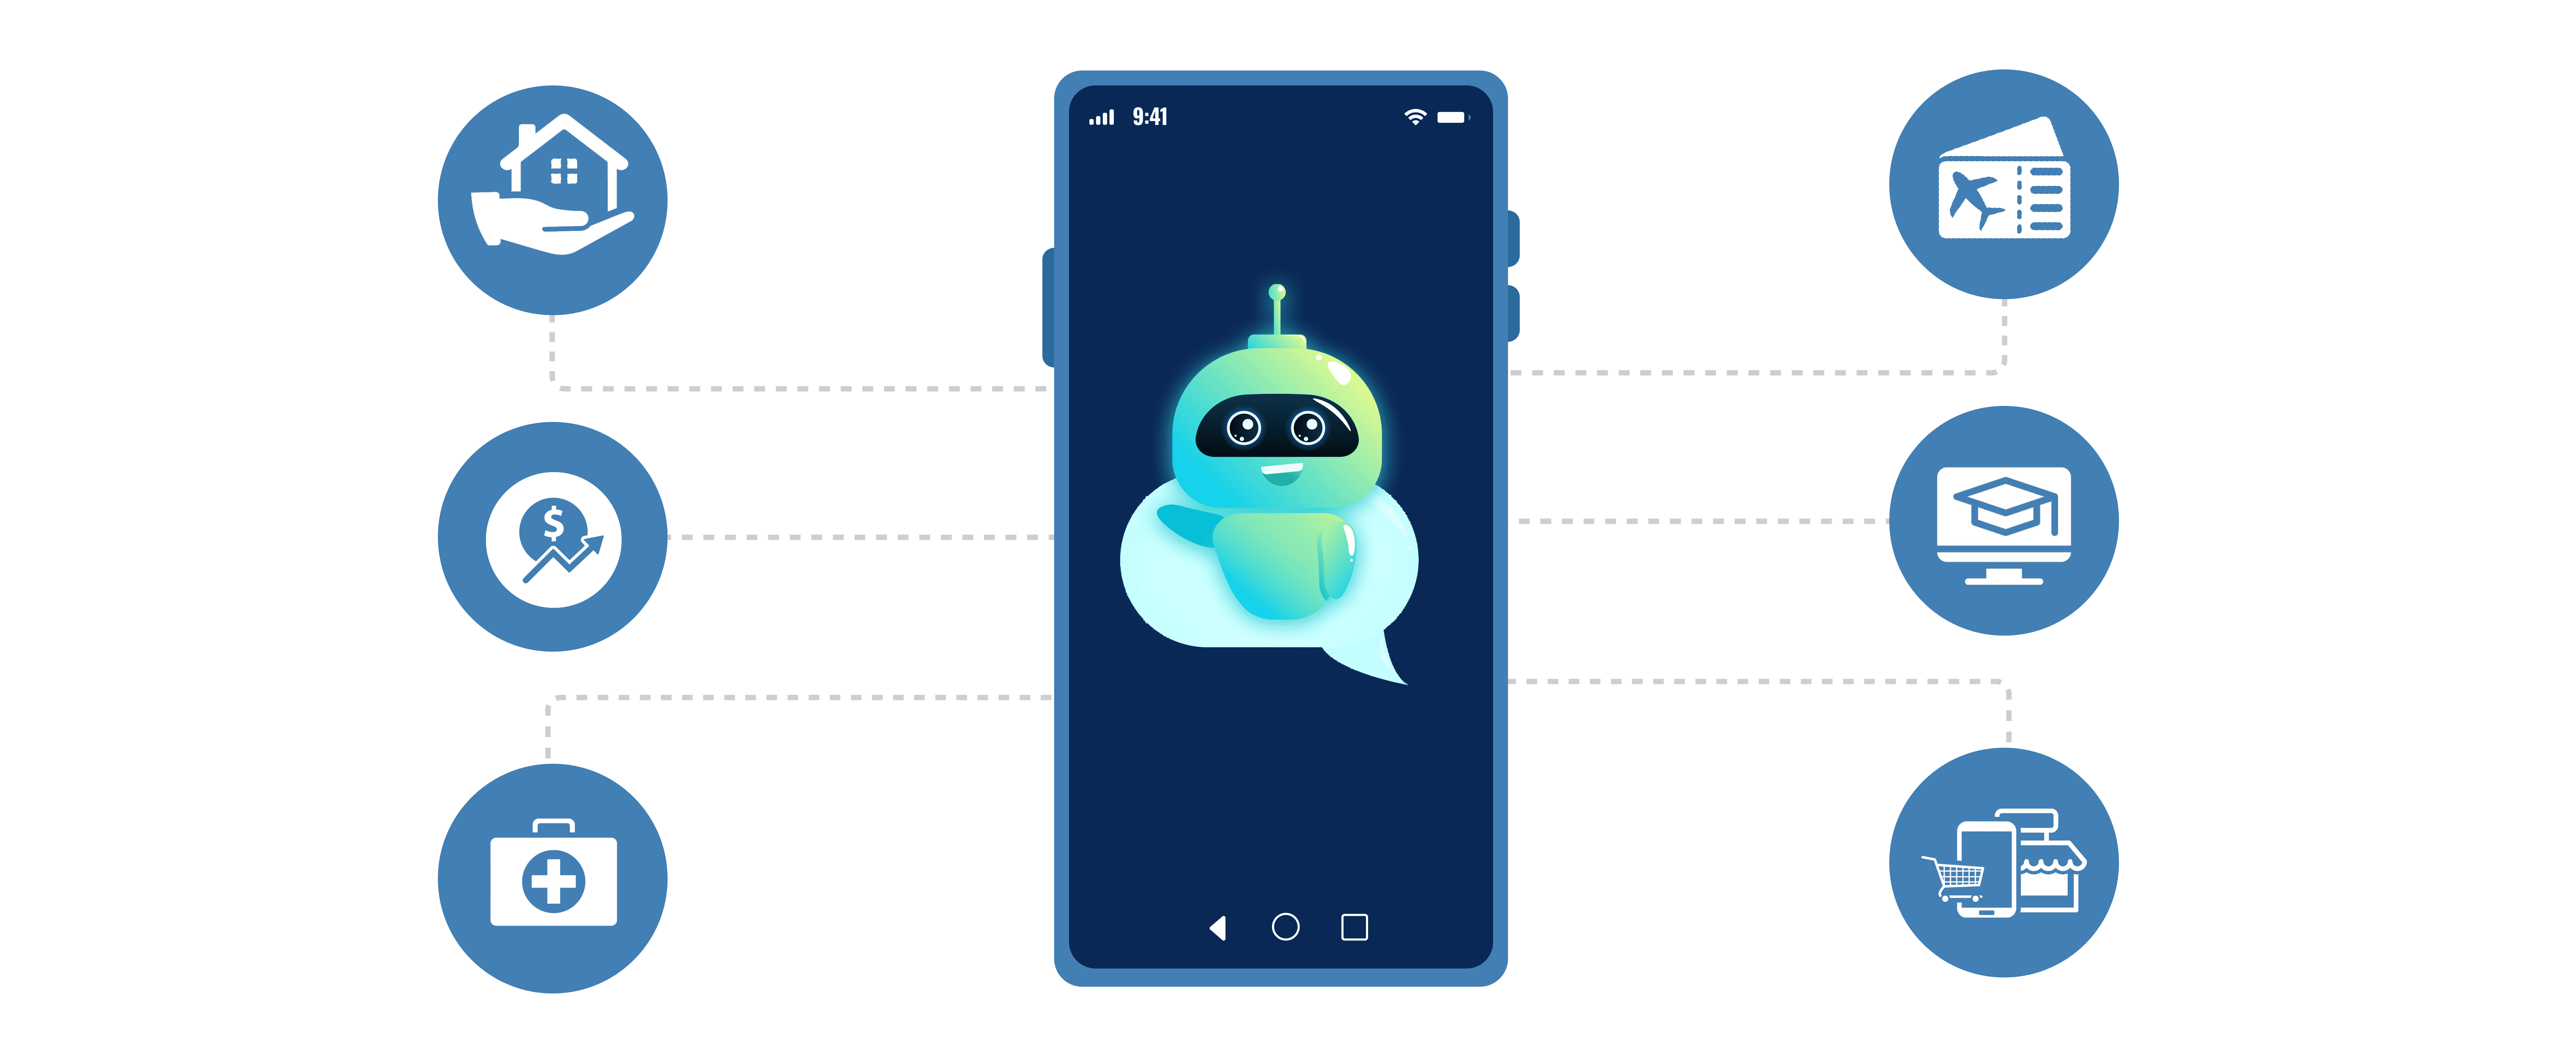 JUSTCALL-SMS-BOT-USE-CASE